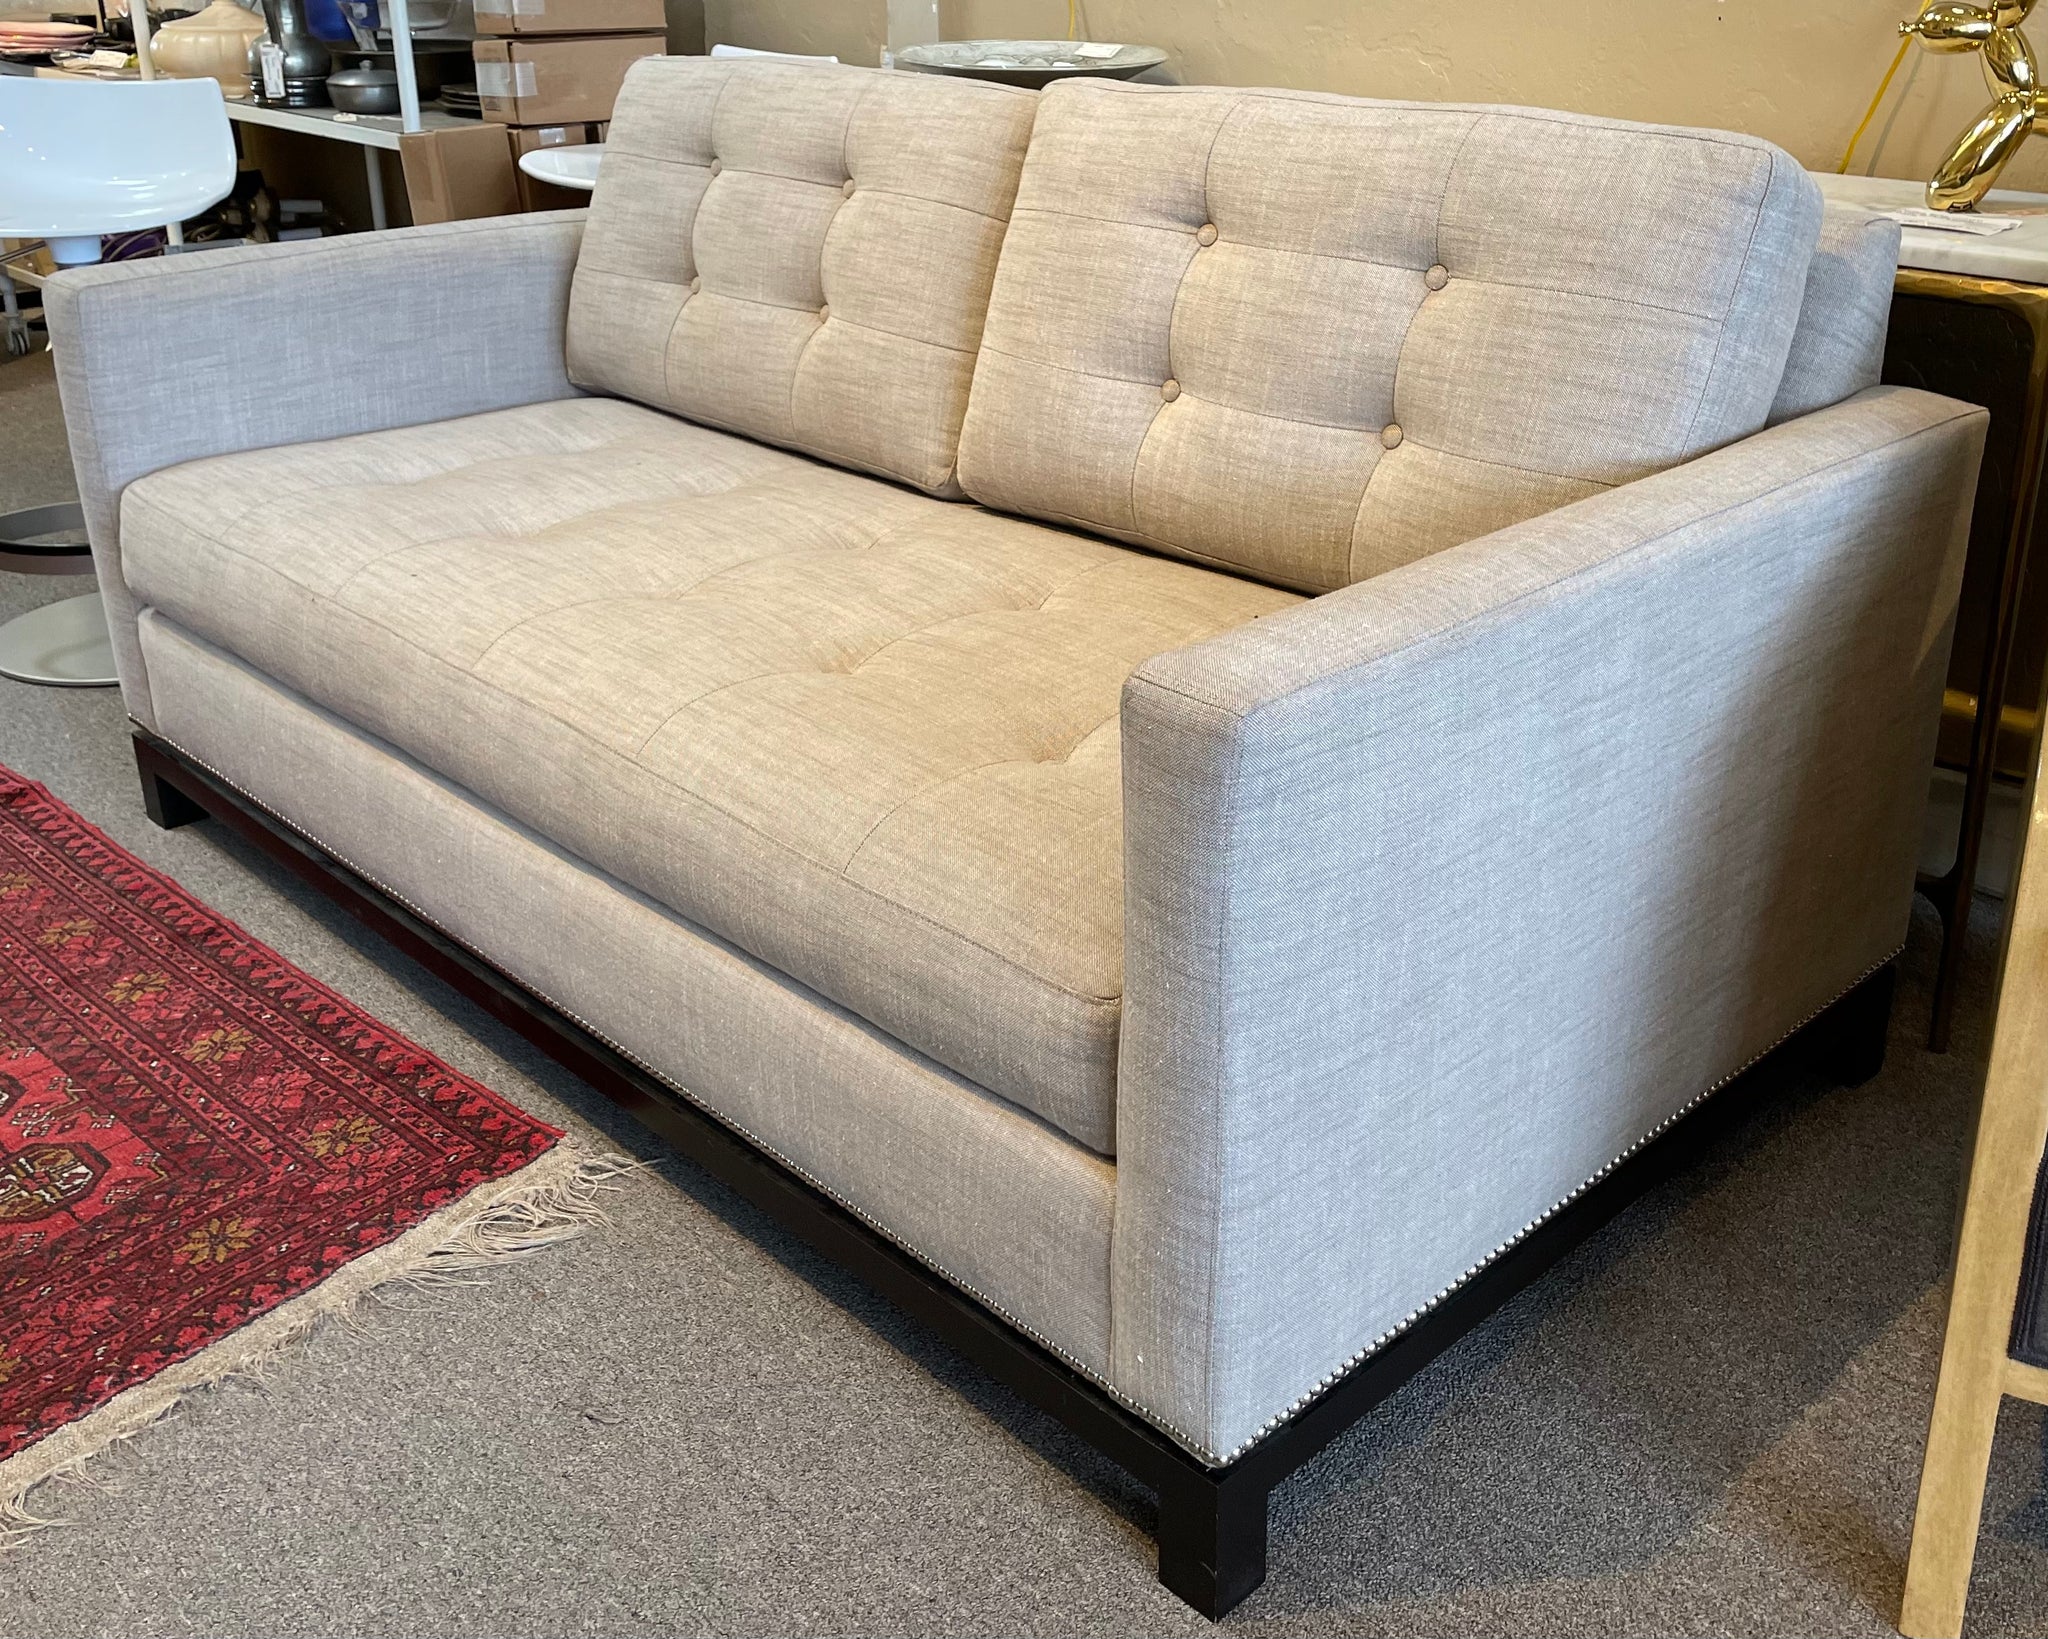 New Linen Blend Button Tufted Sofa with Nailhead Trim.